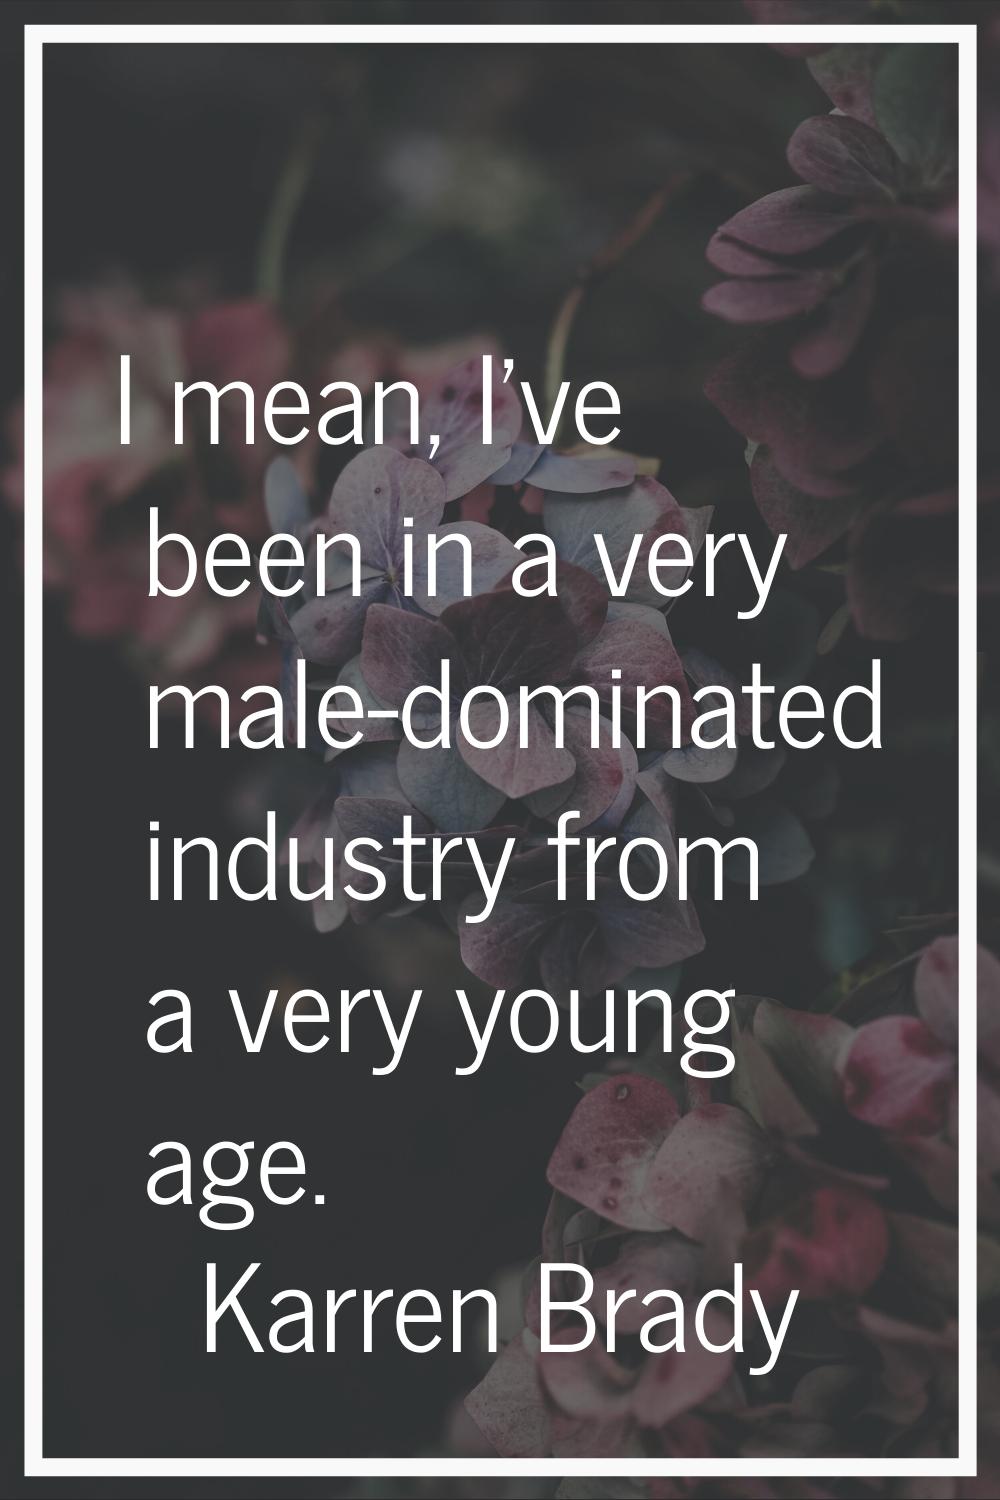 I mean, I've been in a very male-dominated industry from a very young age.